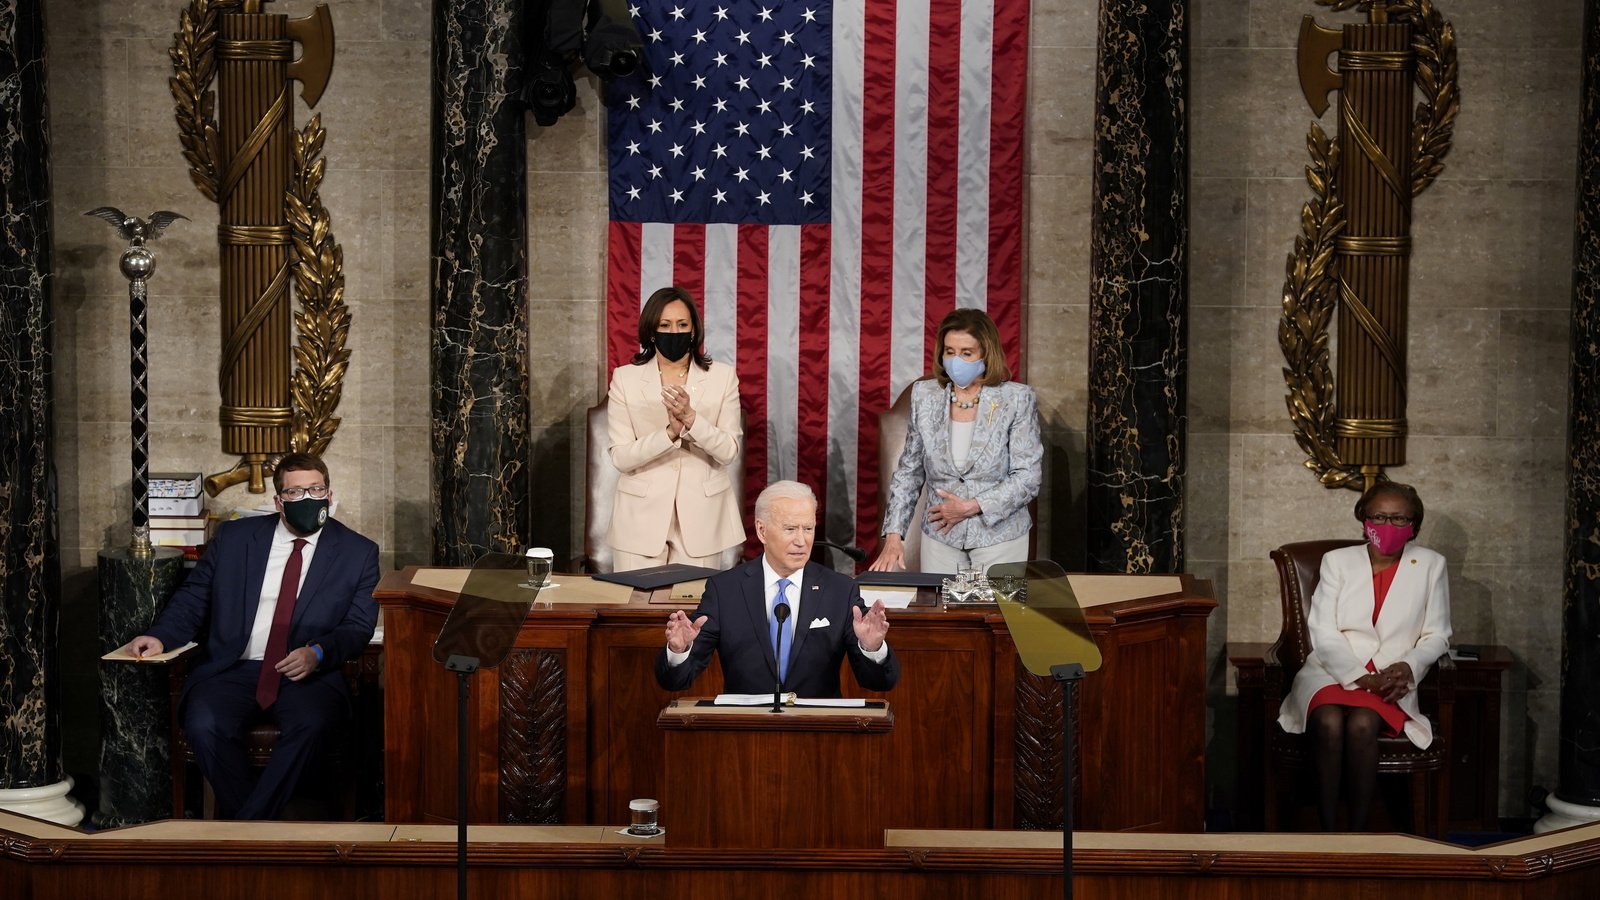 State of the Union Address Focuses on Private Equity’s Impact on